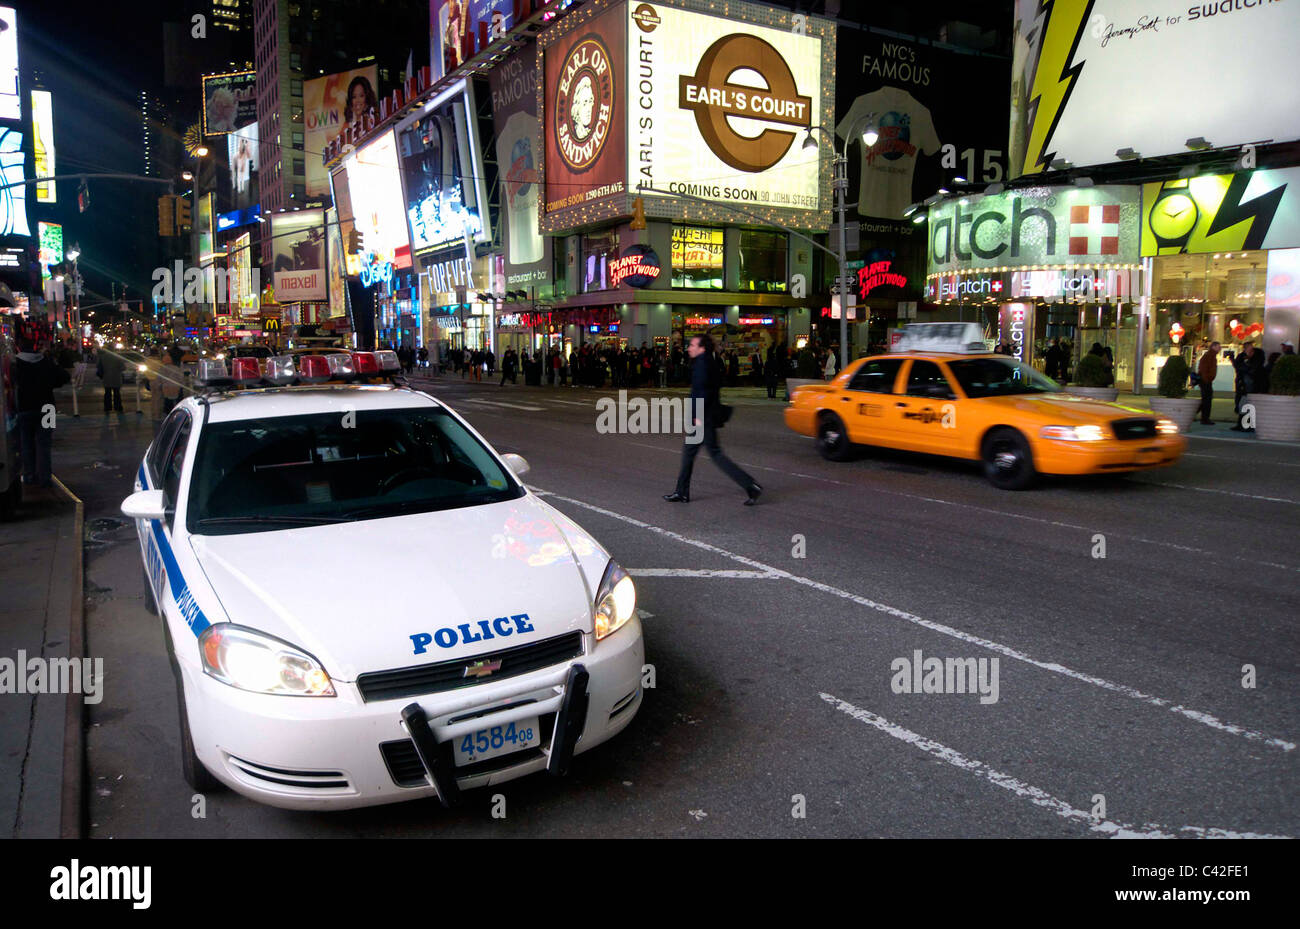 Police car in Time Square at night Stock Photo